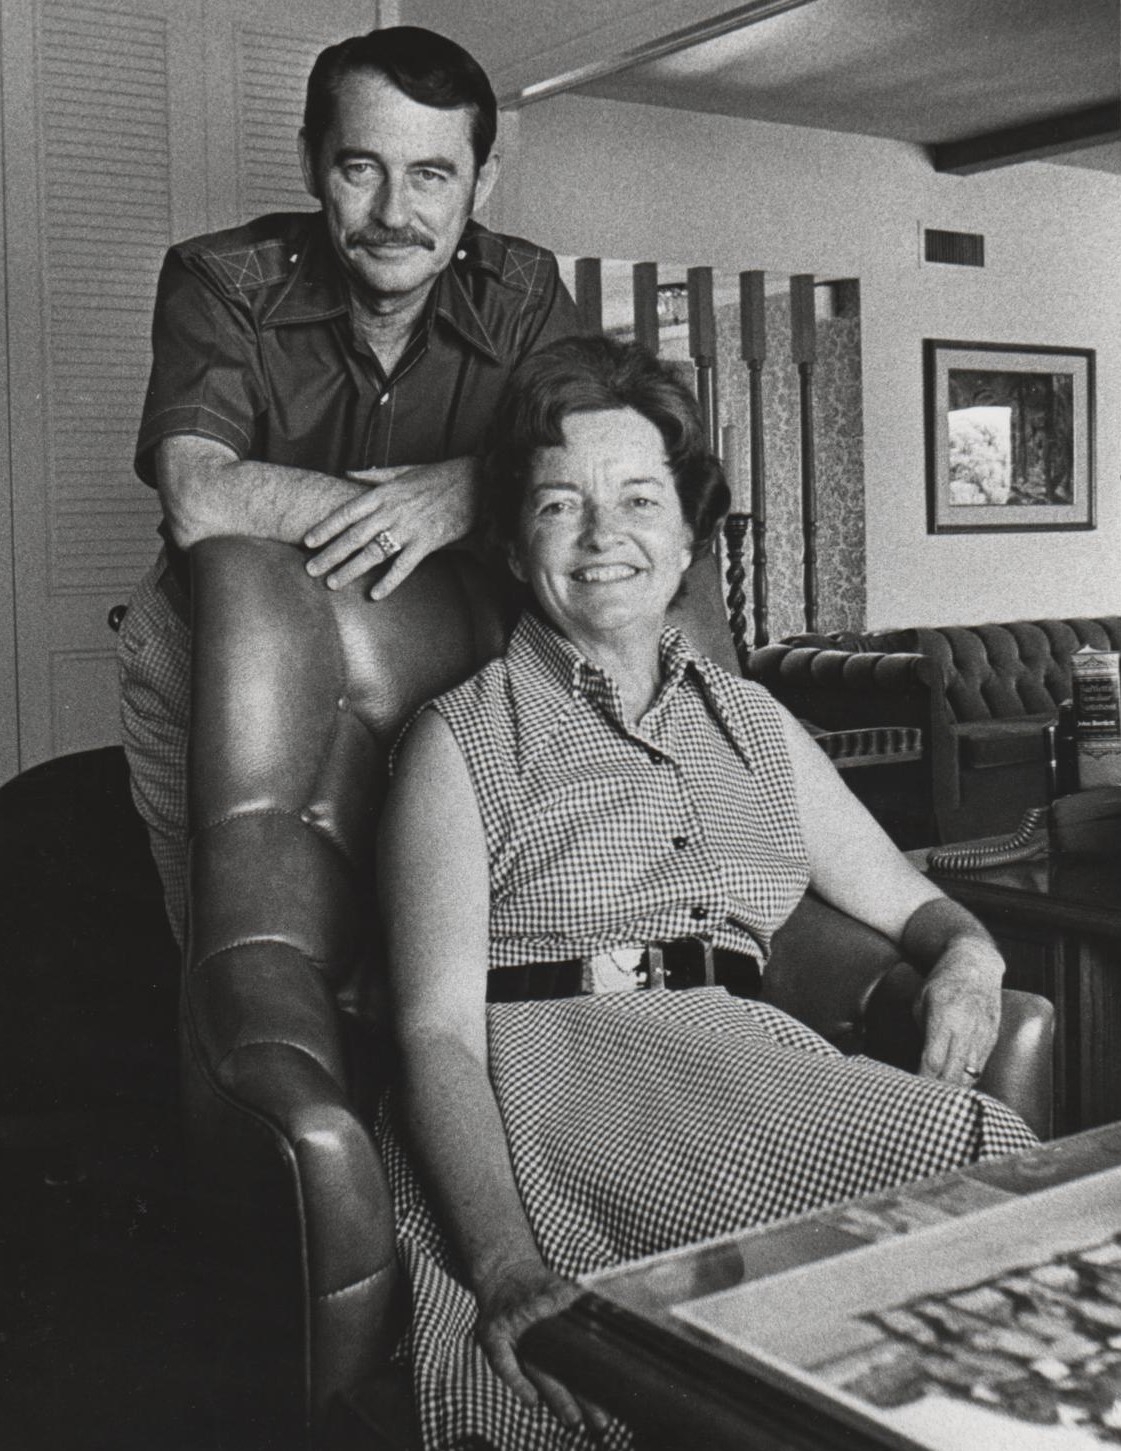 Writers Glendon and Kathryn Swarthout pose in their study in Scottsdale, AZ in this undated photo which is courtesy of the Swarthout Family.